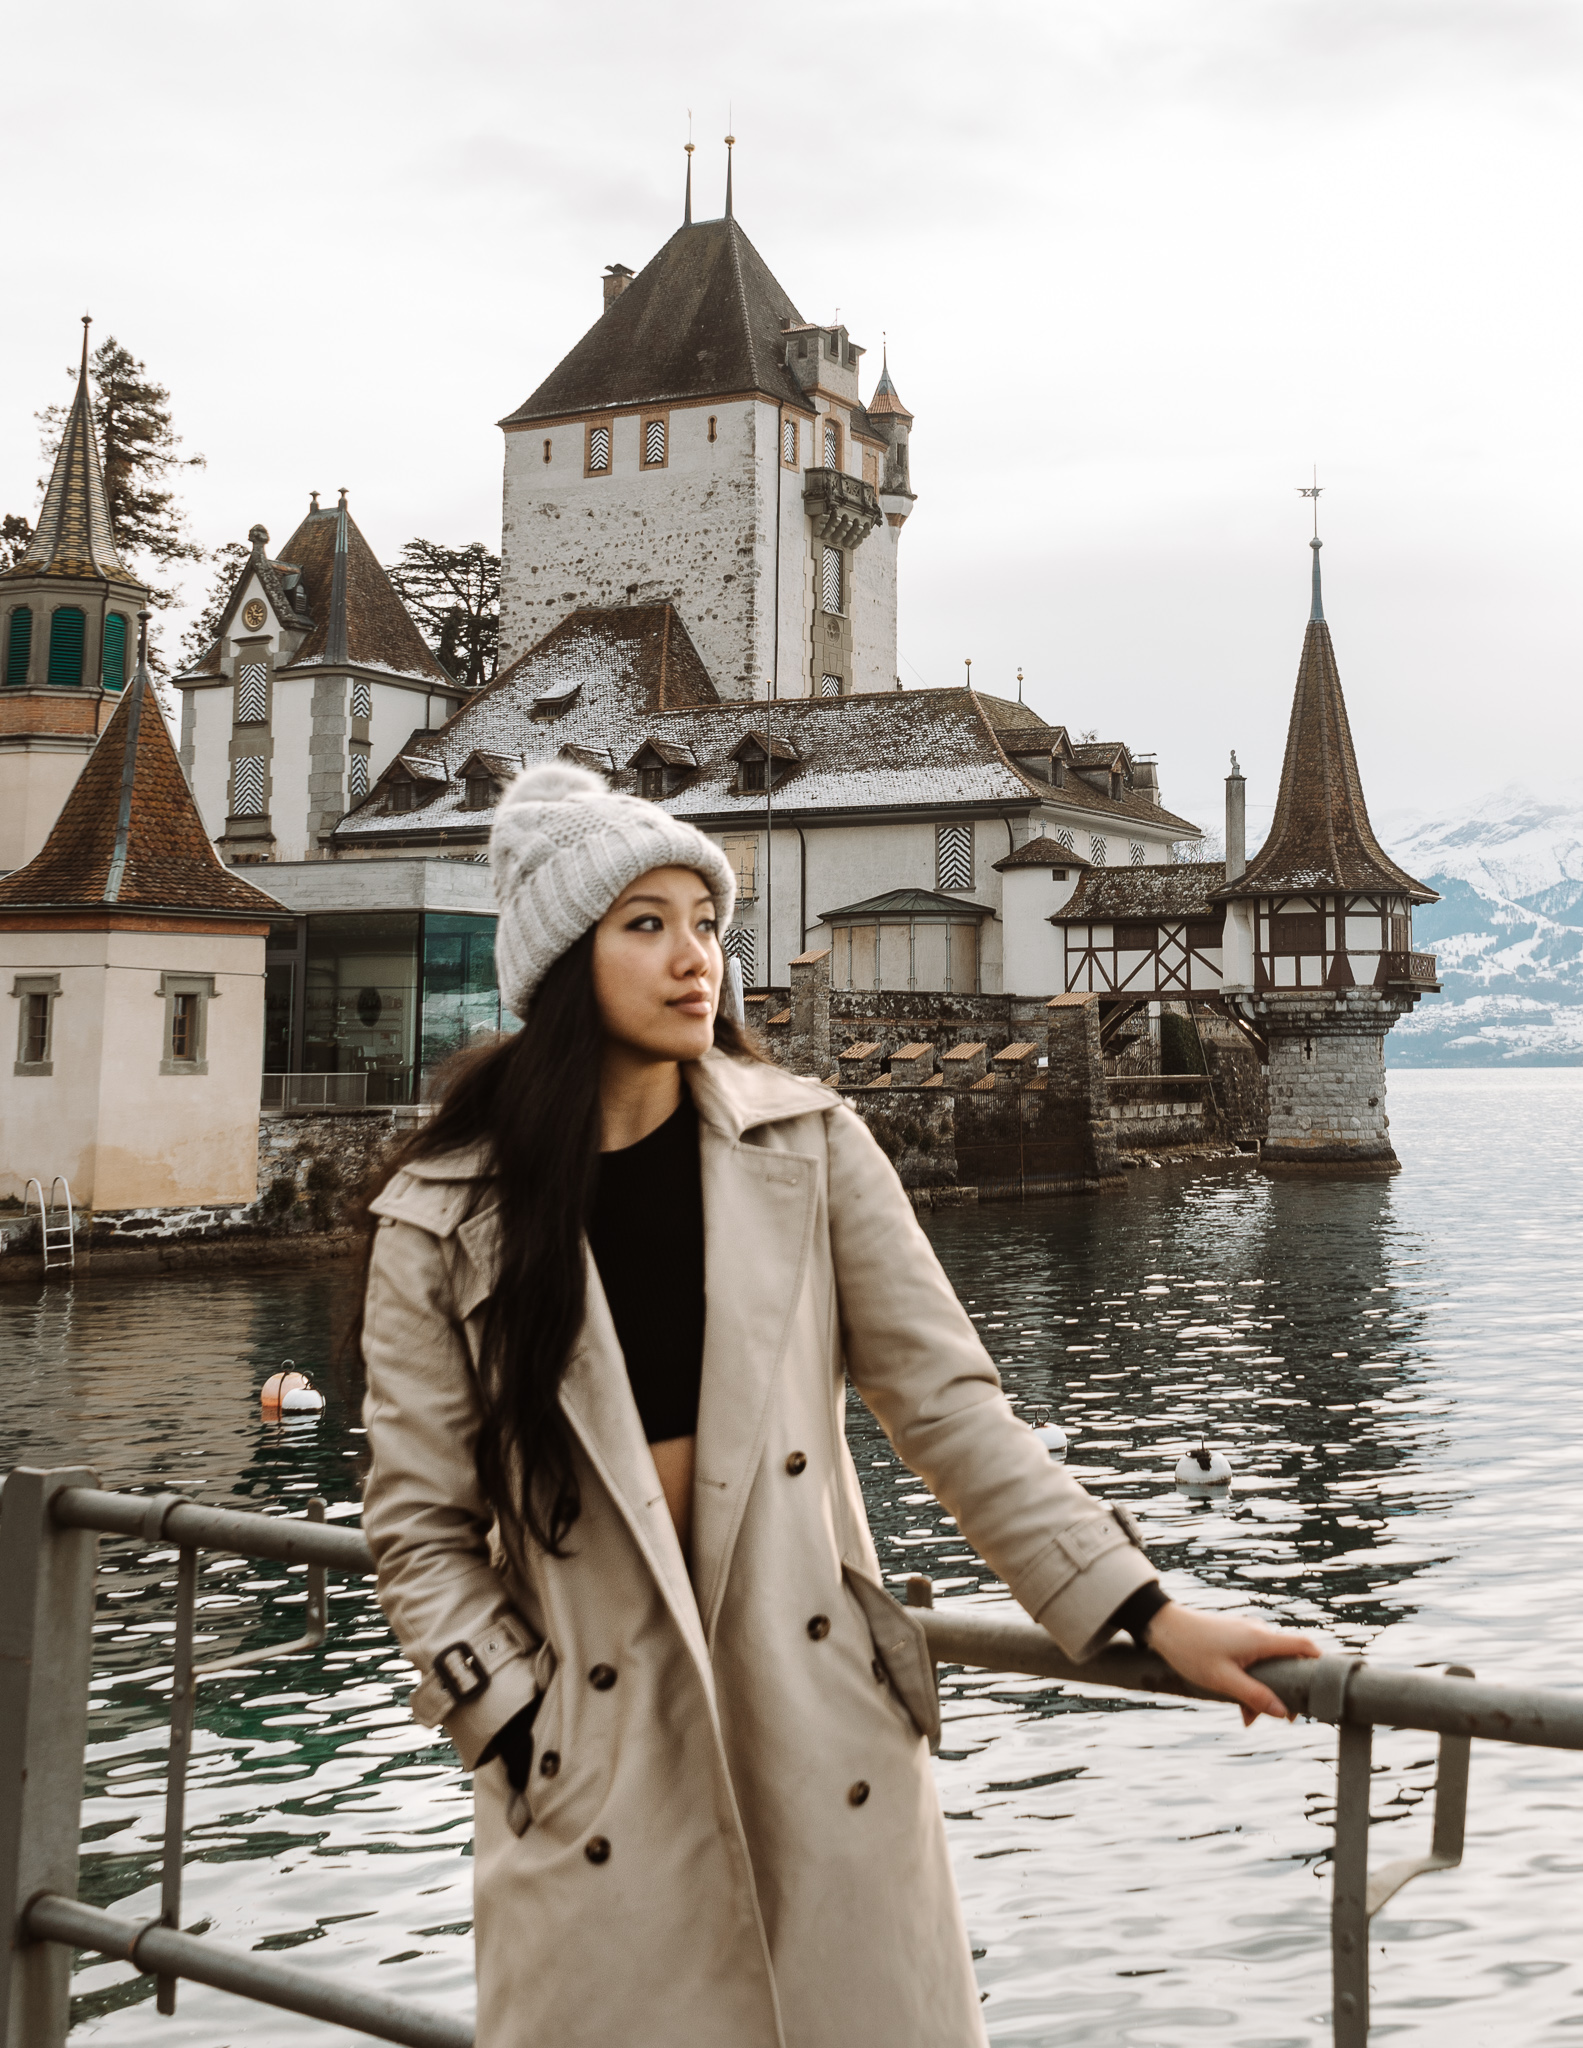 A woman stading in front of Oberhofen Castle, a medieval style castle right on a lake in winter.